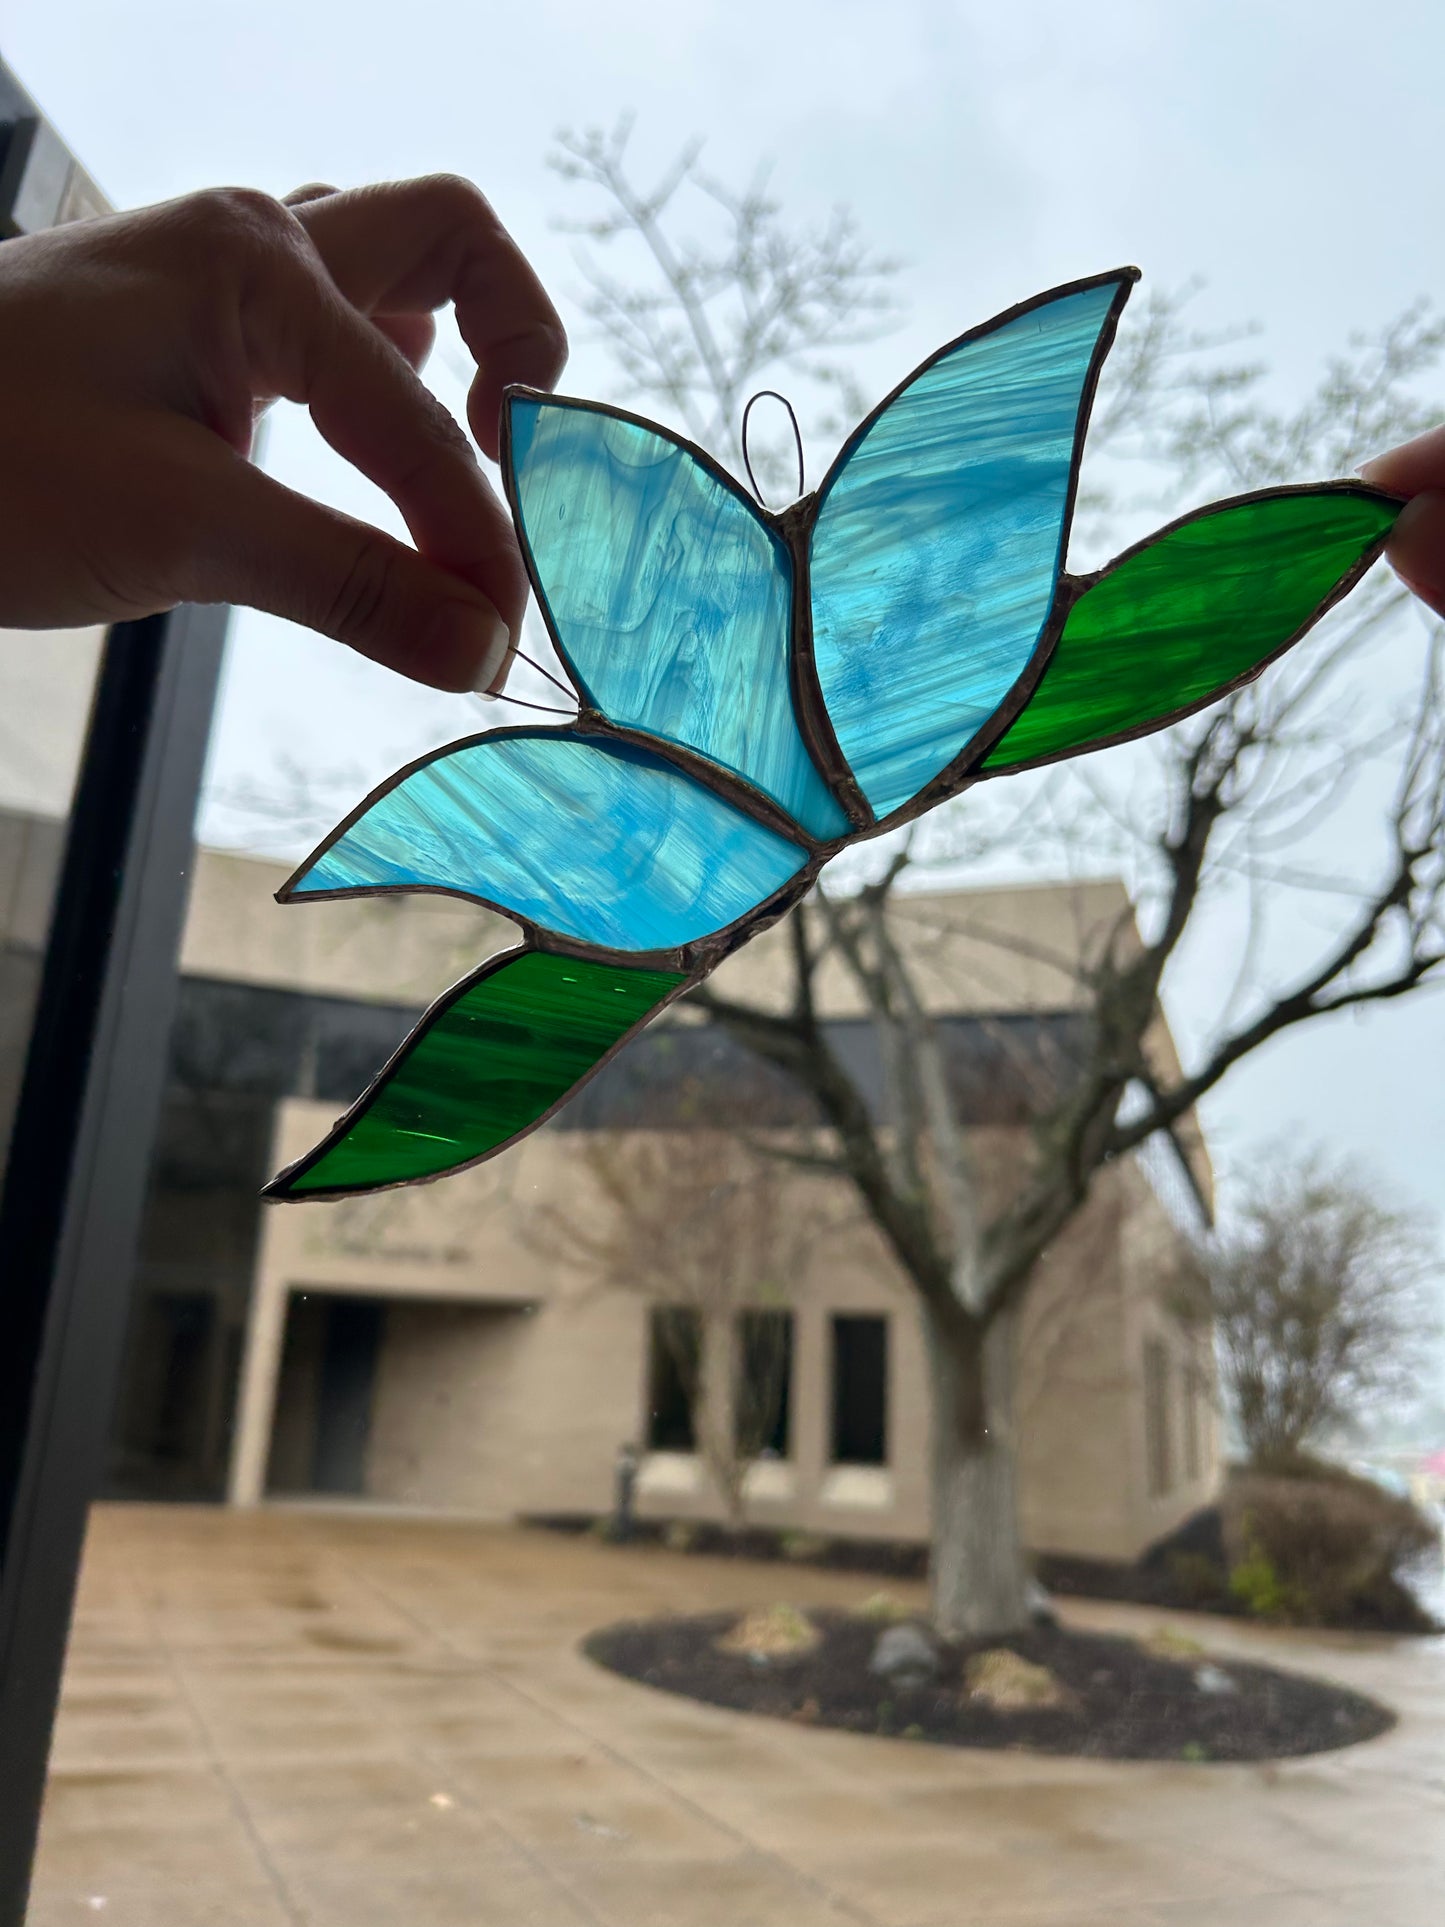 Beginner Stained Glass class, May 9, 4-6:30 pm